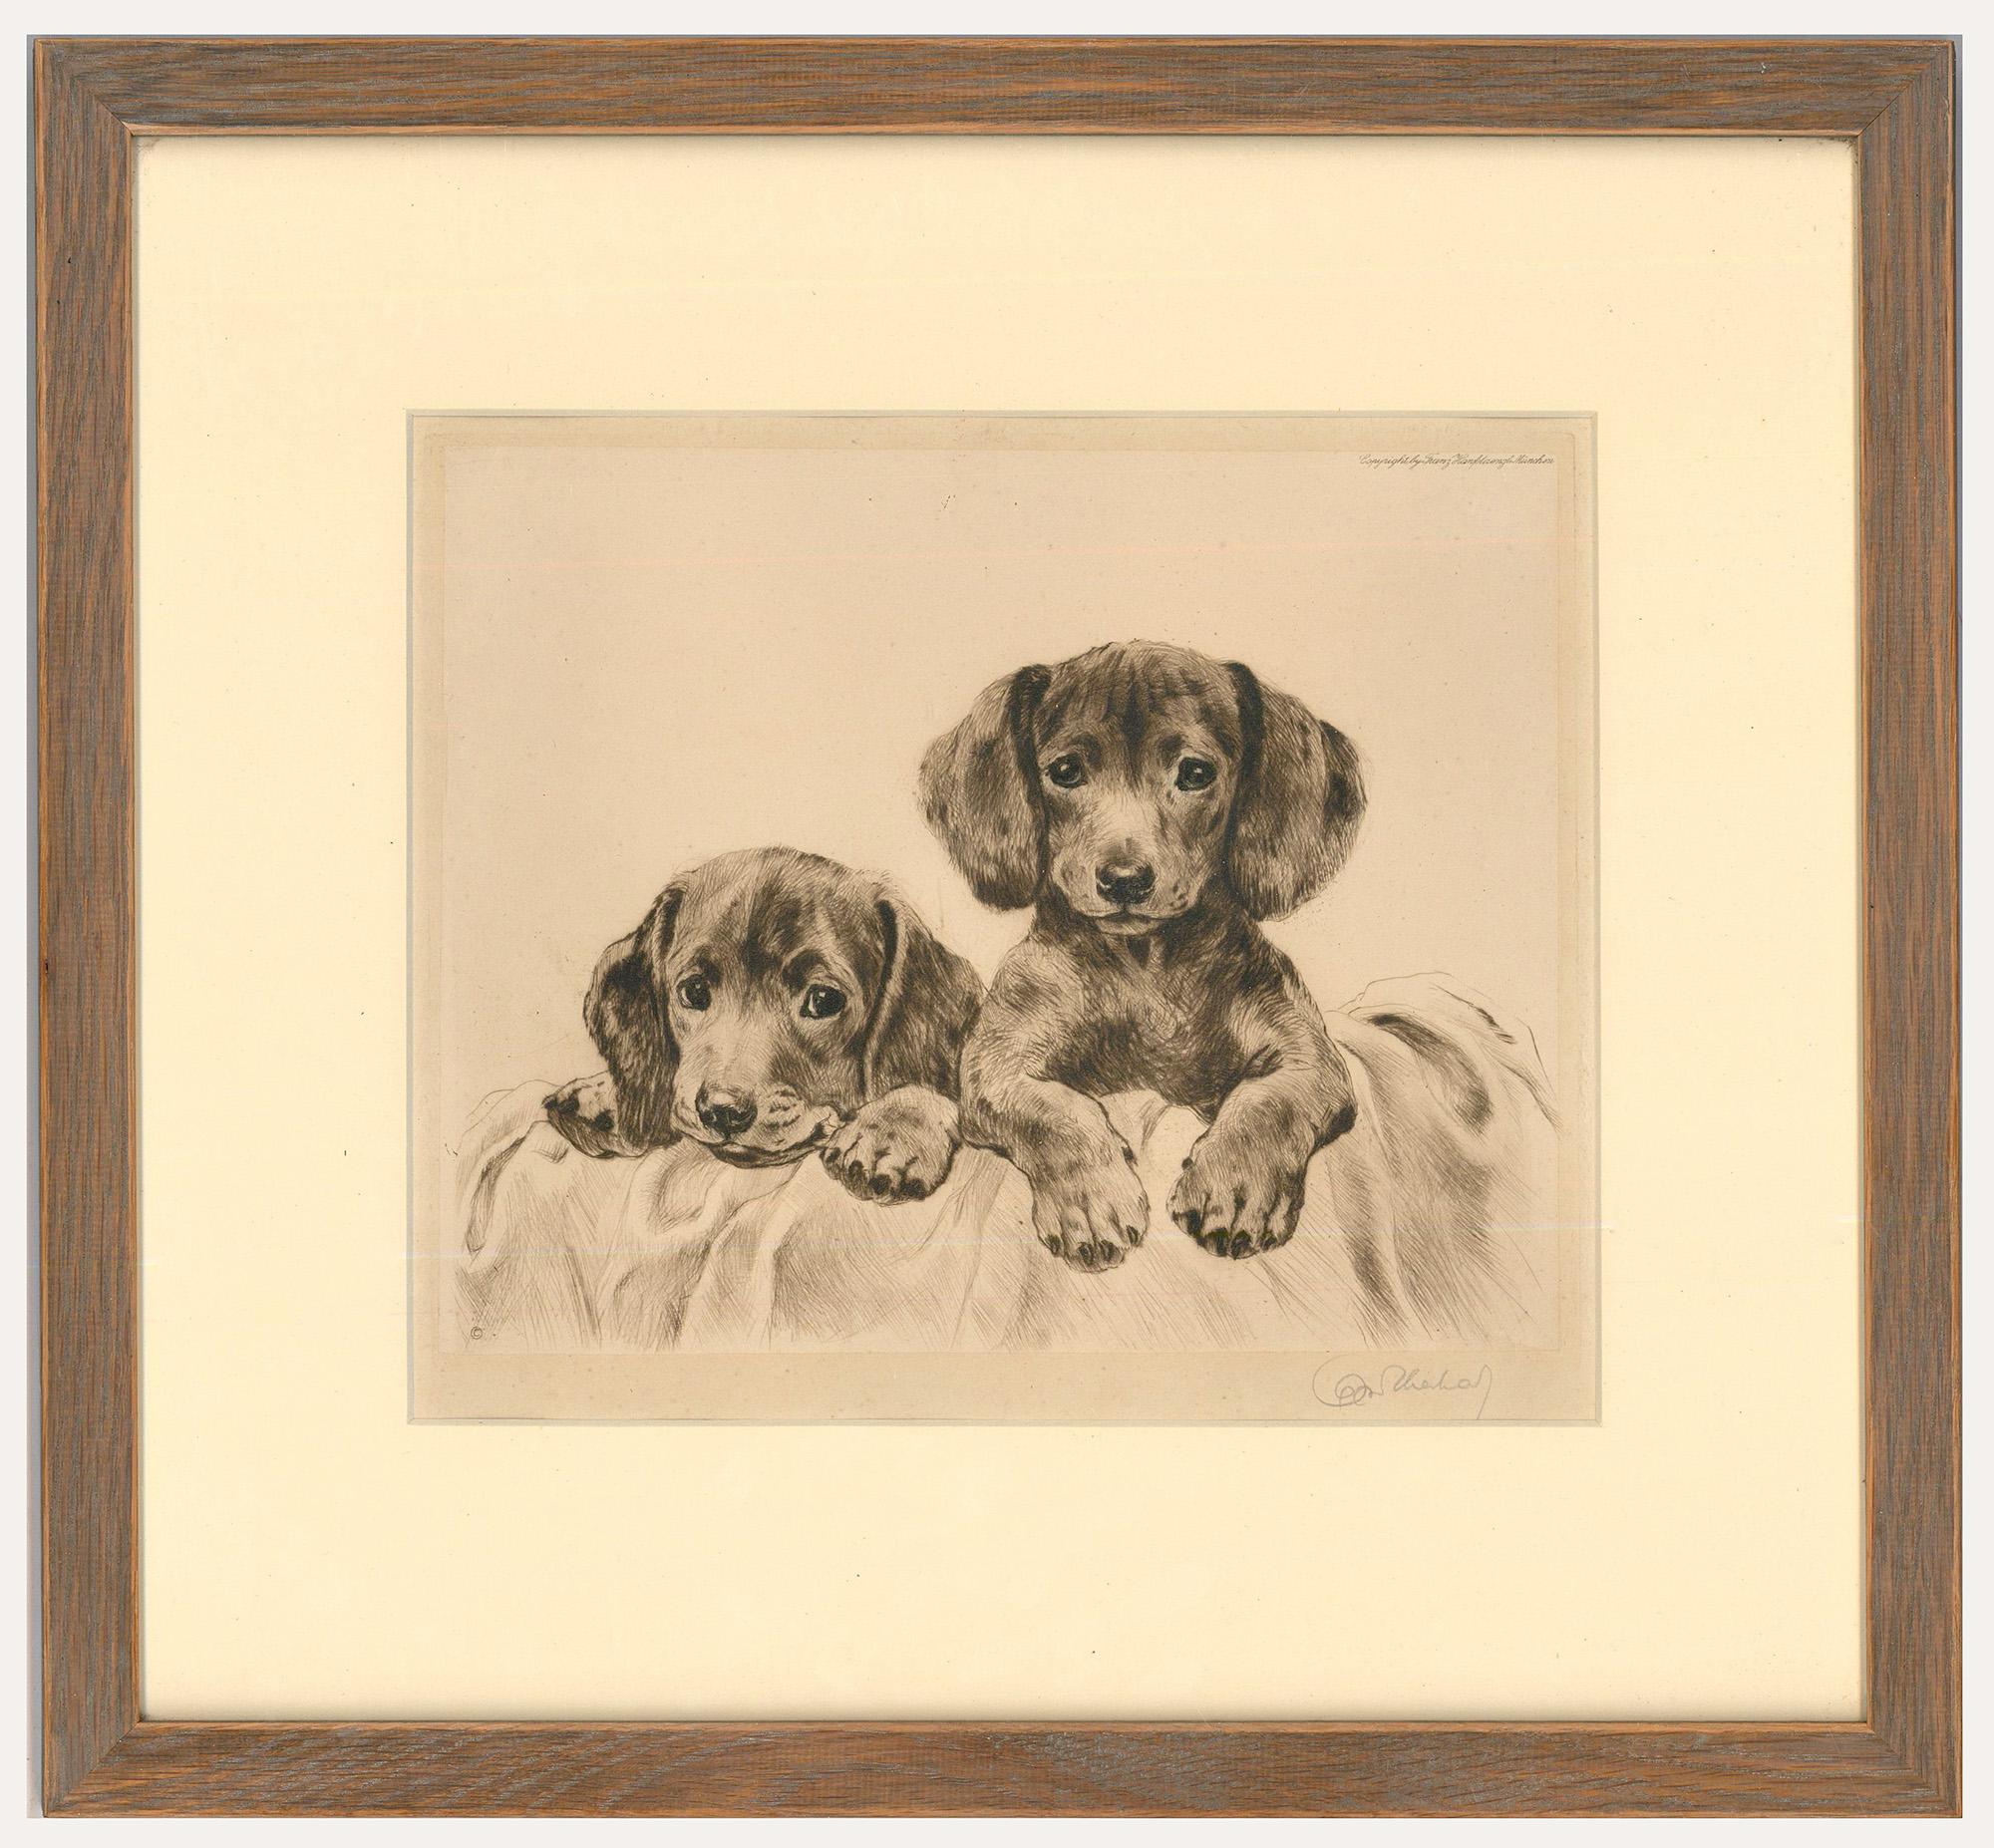 An adorable etching of two Dachshund puppies by the famous German artist & printmaker Kurt Meyer-Eberhardt (1895-1977). Published by Franz Hanfstaengl in Munich, as inscribed. The print has been beautifully mounted in a contemporary wood veneer